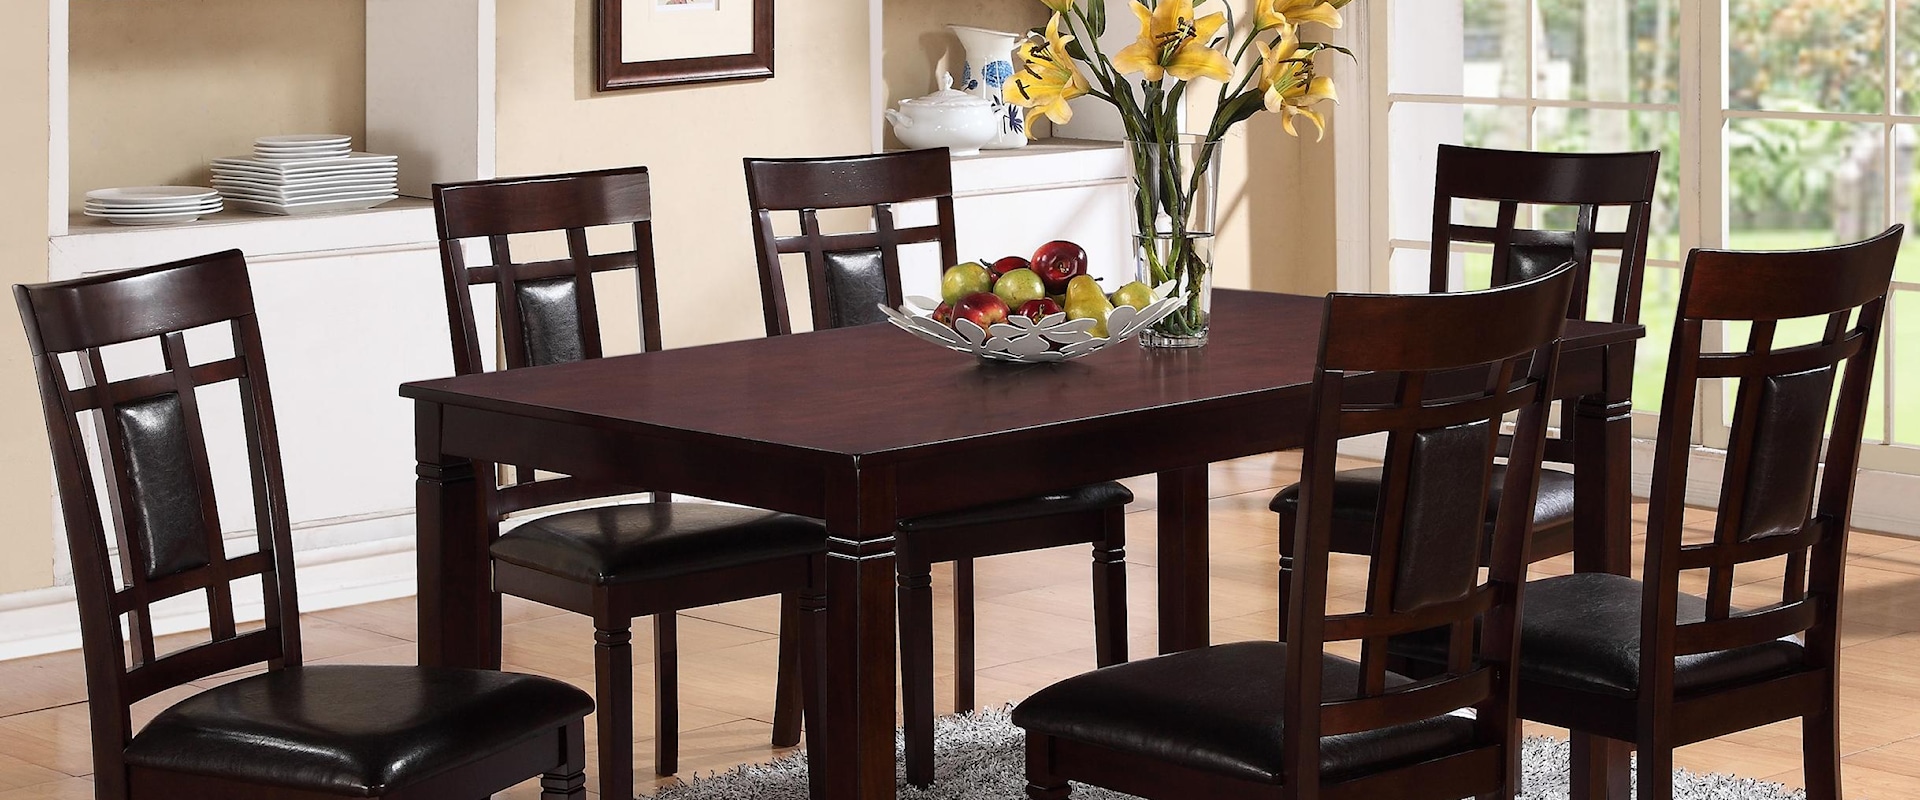 7 Piece Table and Chair Set  with Block Feets